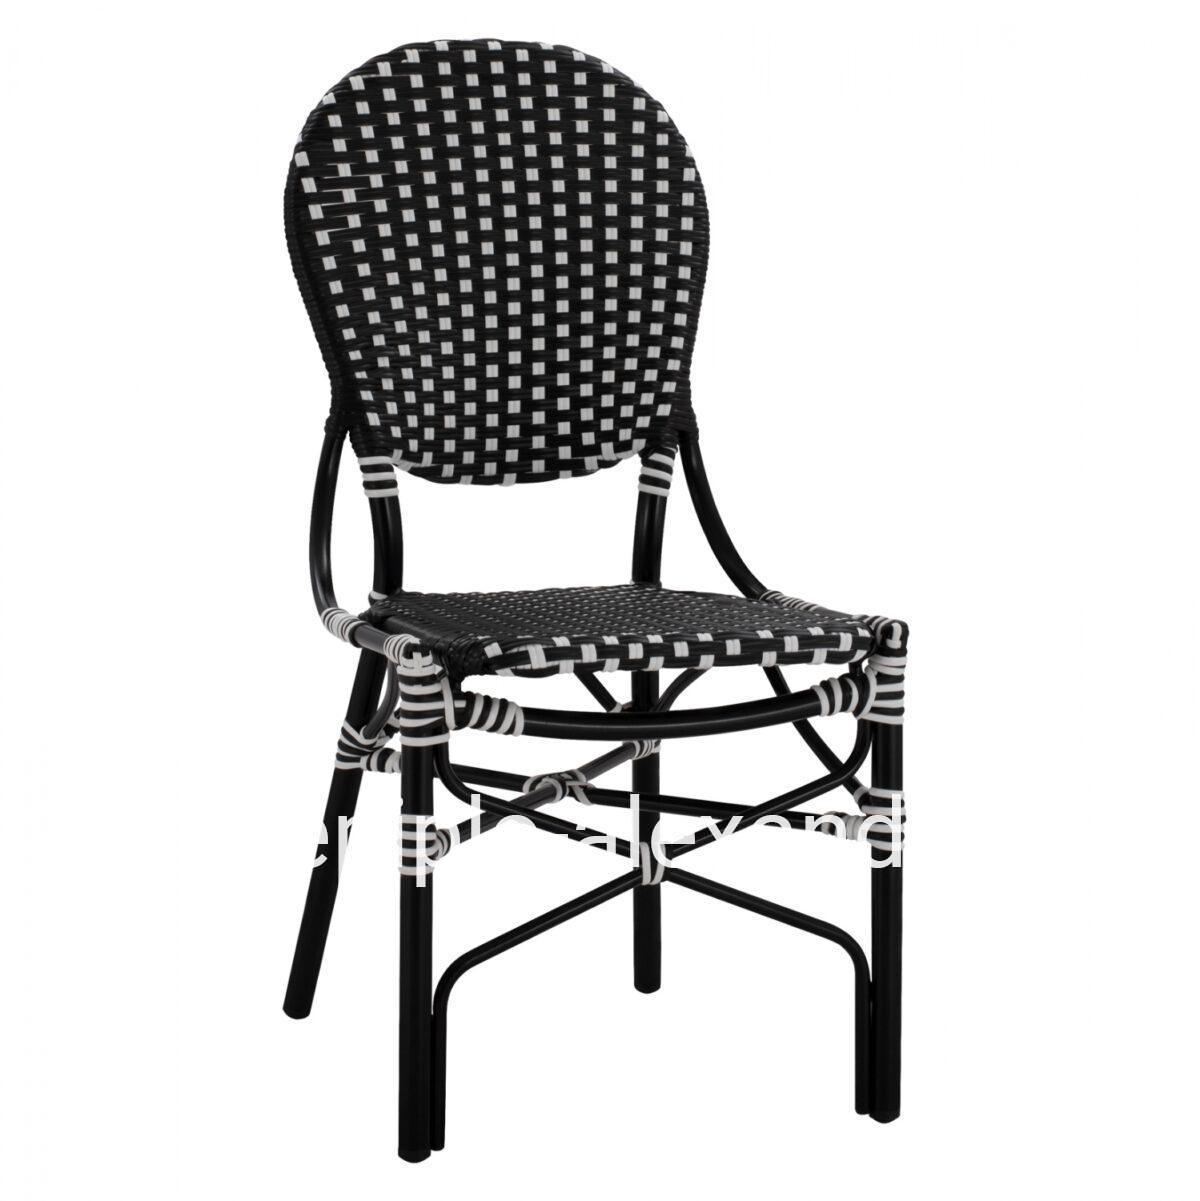 ALUMINUM CHAIR BAMBOO LOOK WITH WICKER BLACK WHITE HM5792.02 46x60x96 cm.